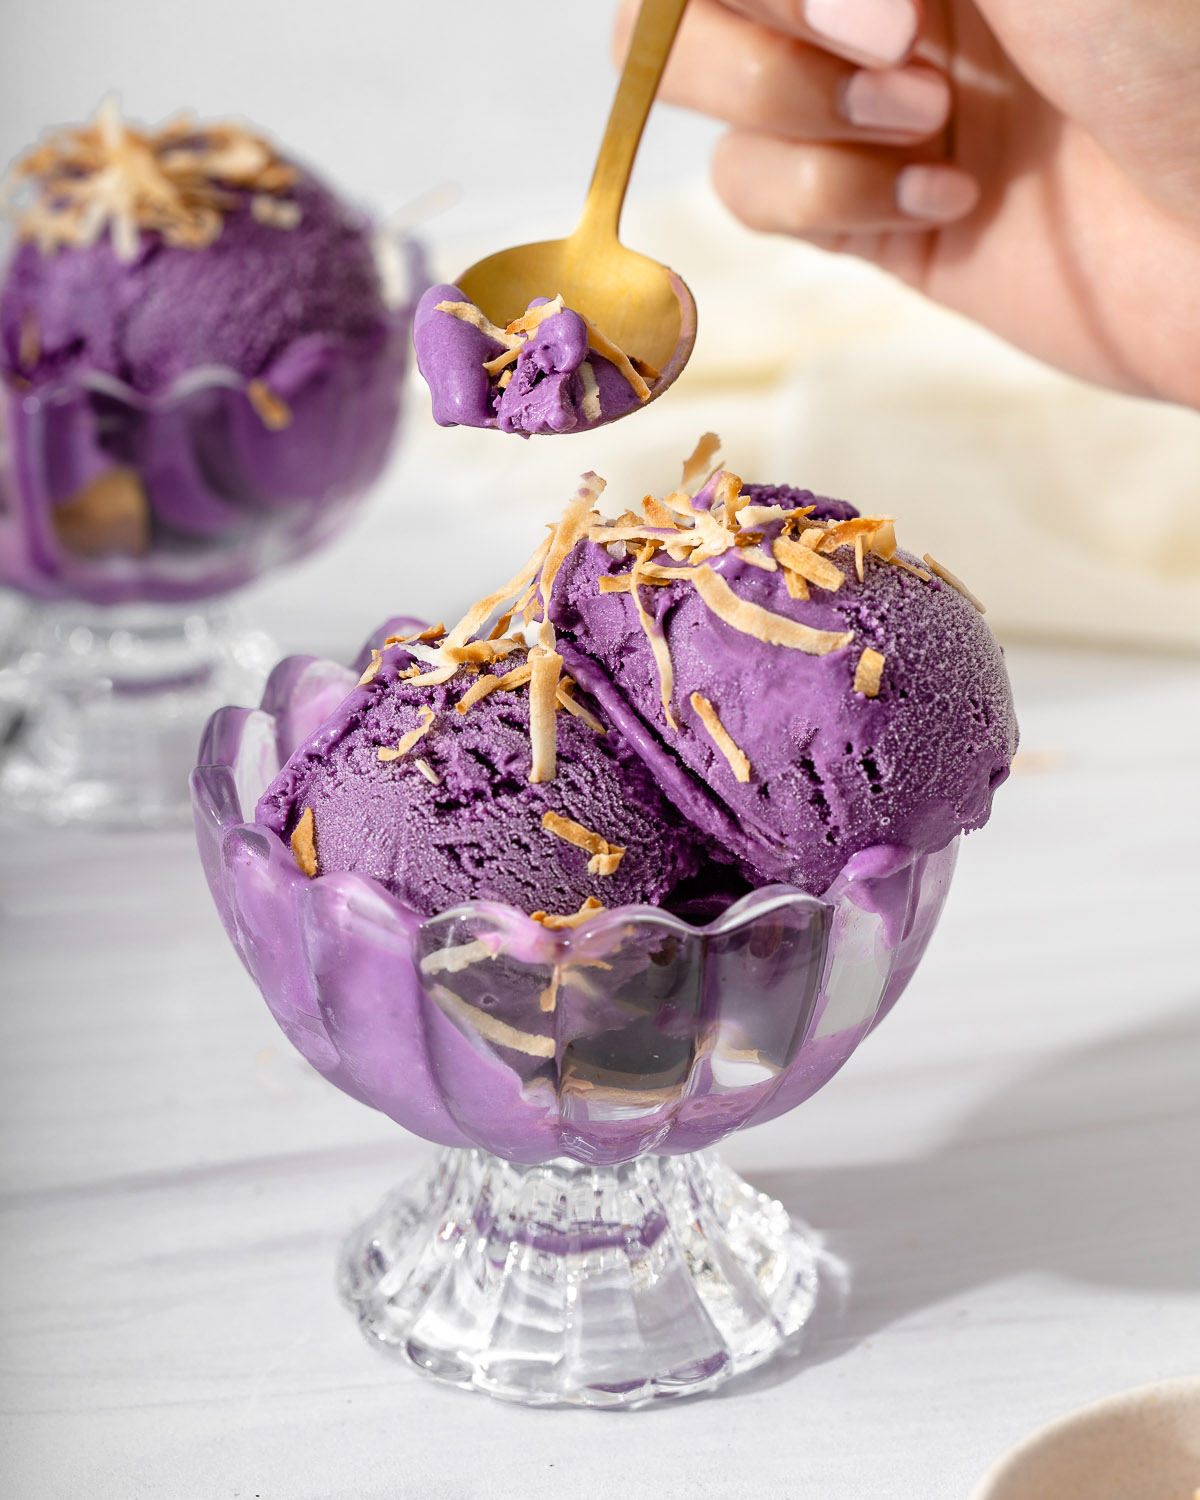 Someone lifting up a spoonful of ube ice cream from a small glass dish.